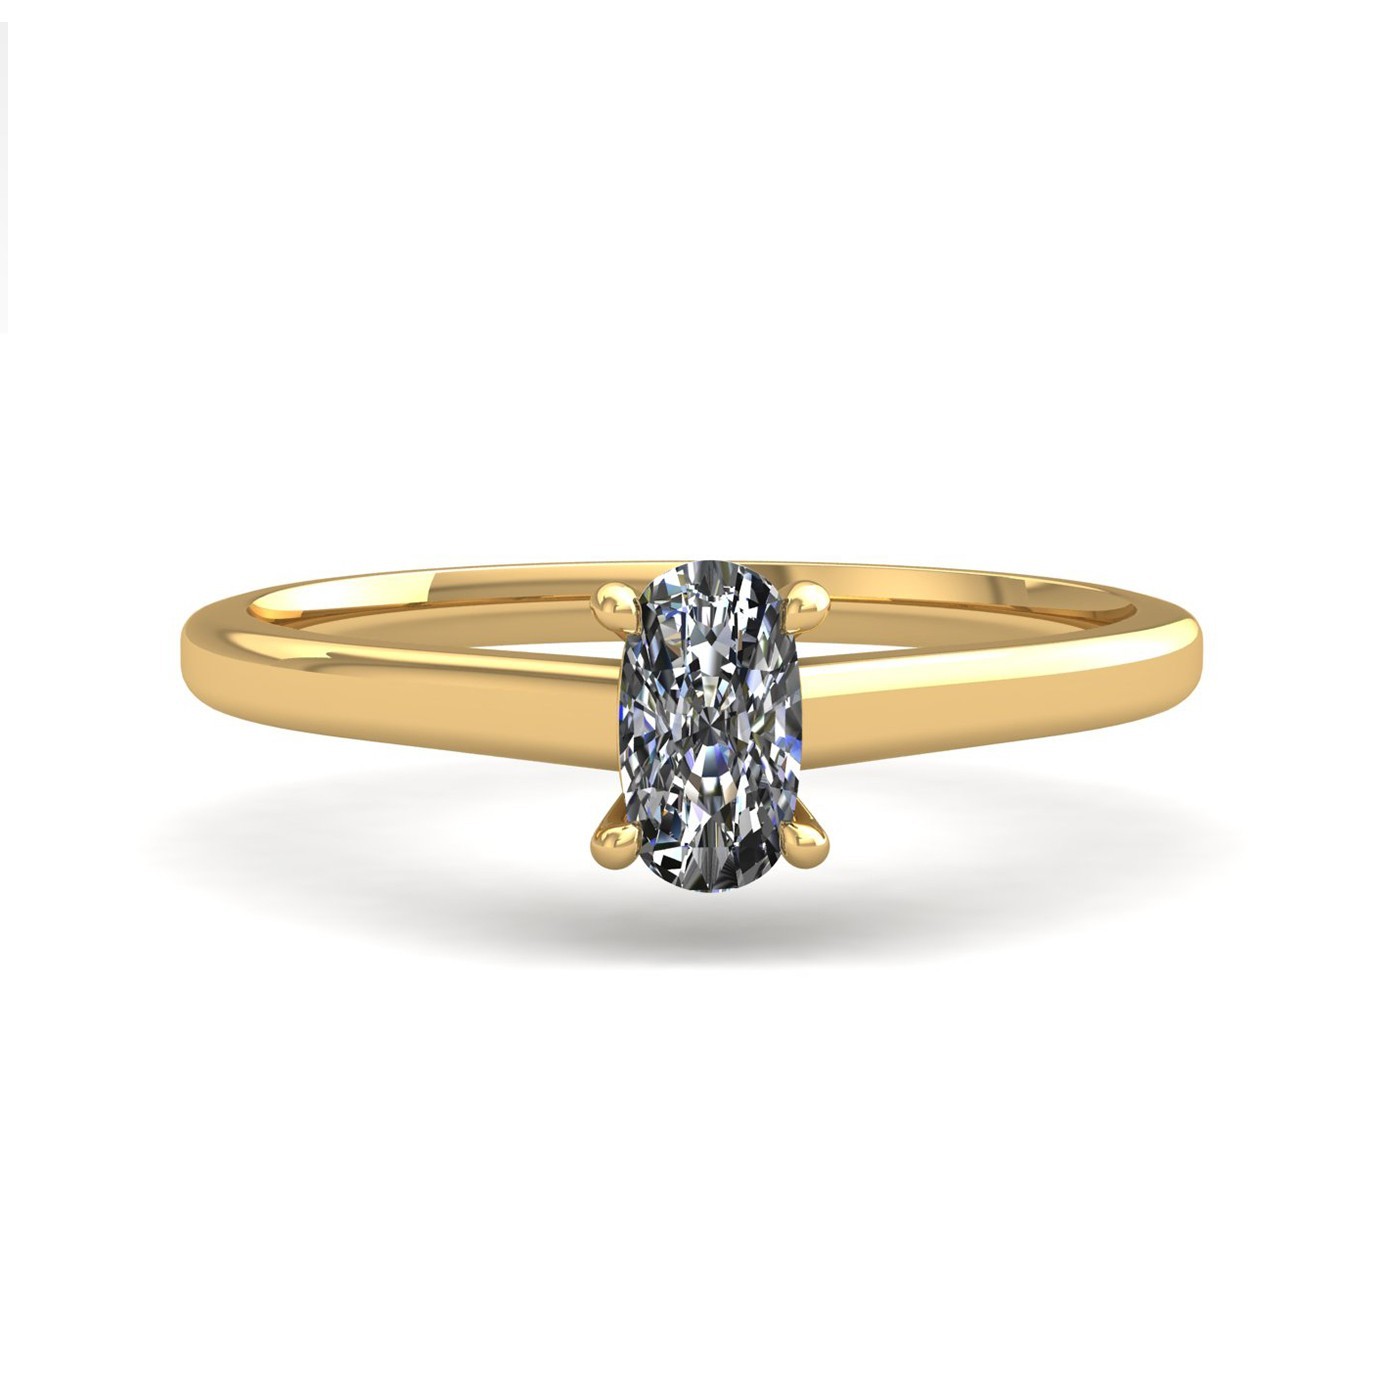 18k yellow gold  0,30 ct 4 prongs solitaire elongated cushion cut diamond engagement ring with whisper thin band Photos & images